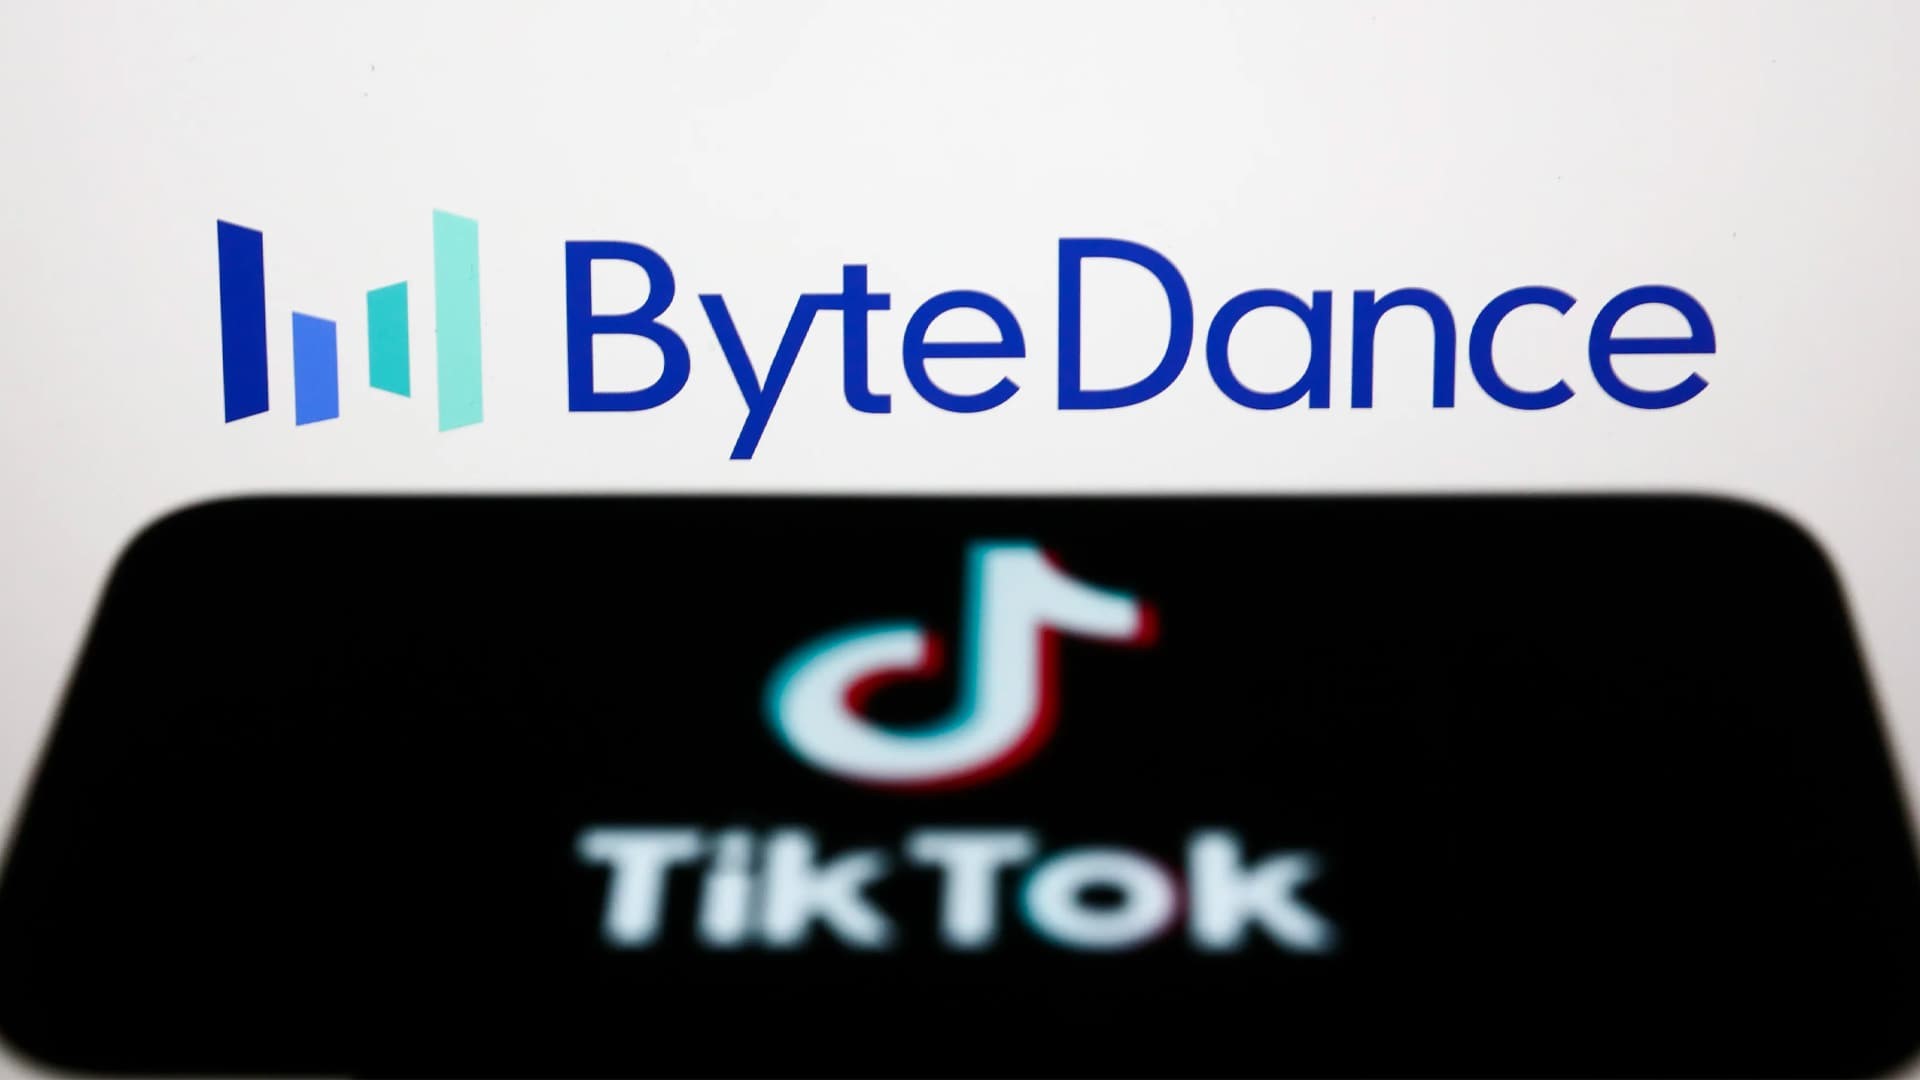 ByteDance Announces Substantial Gaming Business Reduction Amid Industry Struggles